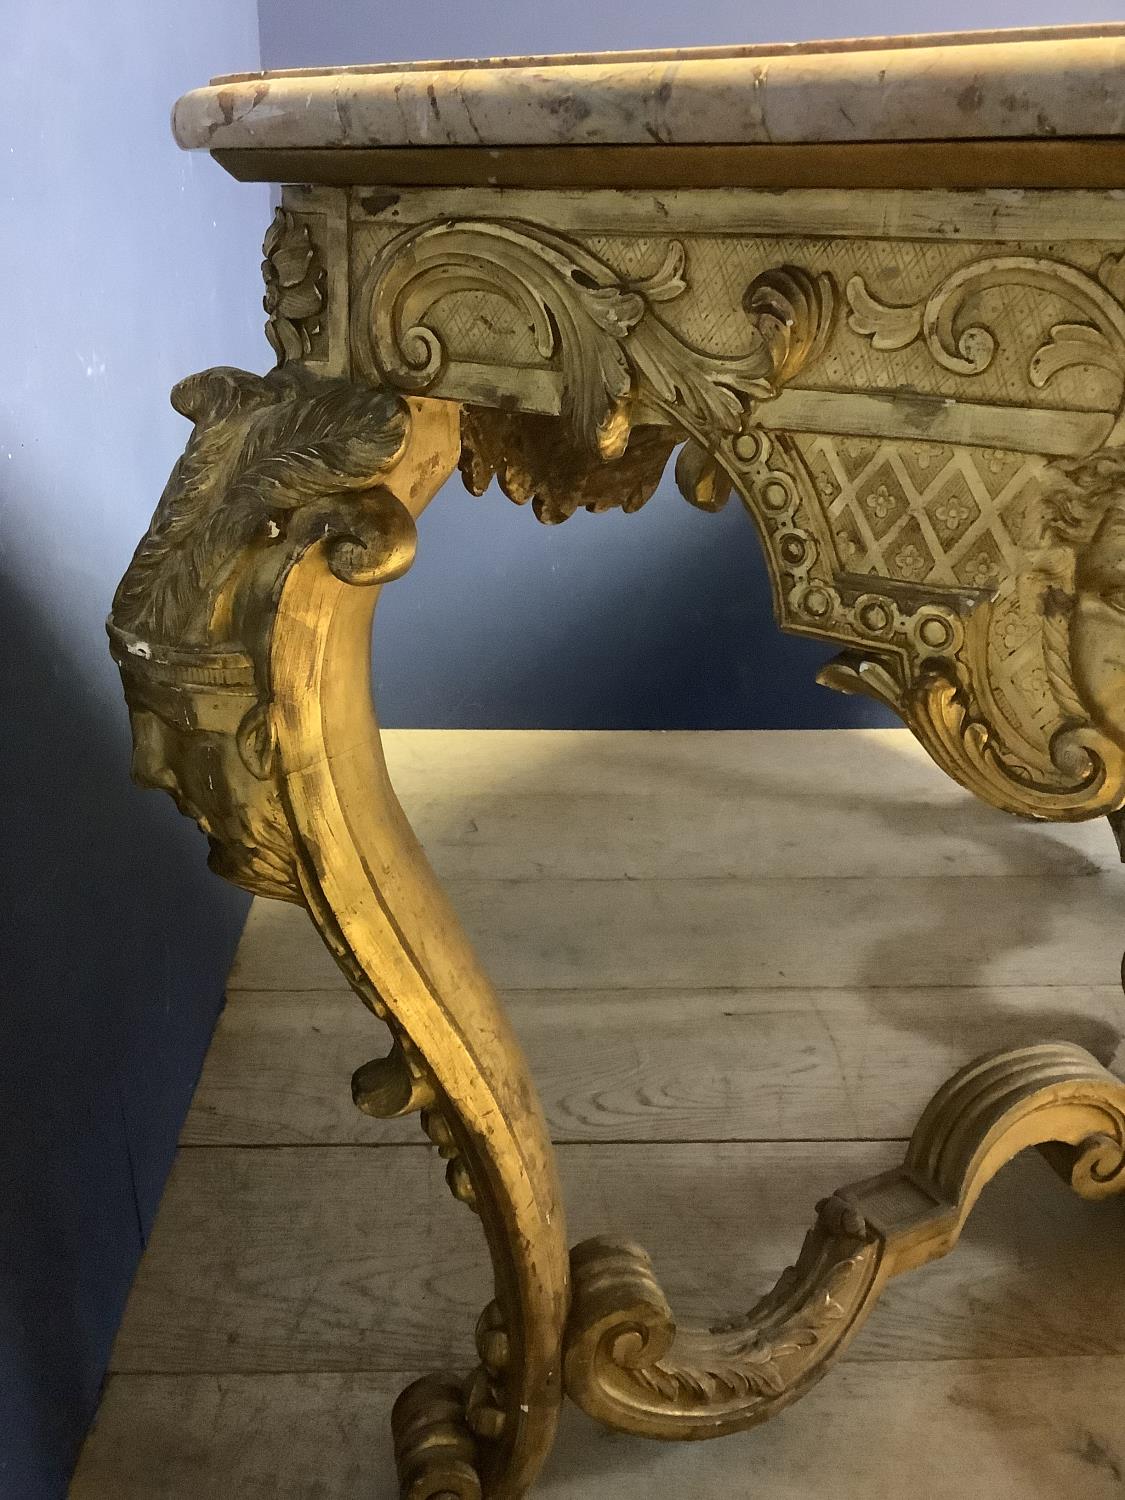 Early C18th/C19th giltwood side table in the manor of William Kent, elaborately carved & gilded unde - Image 9 of 12